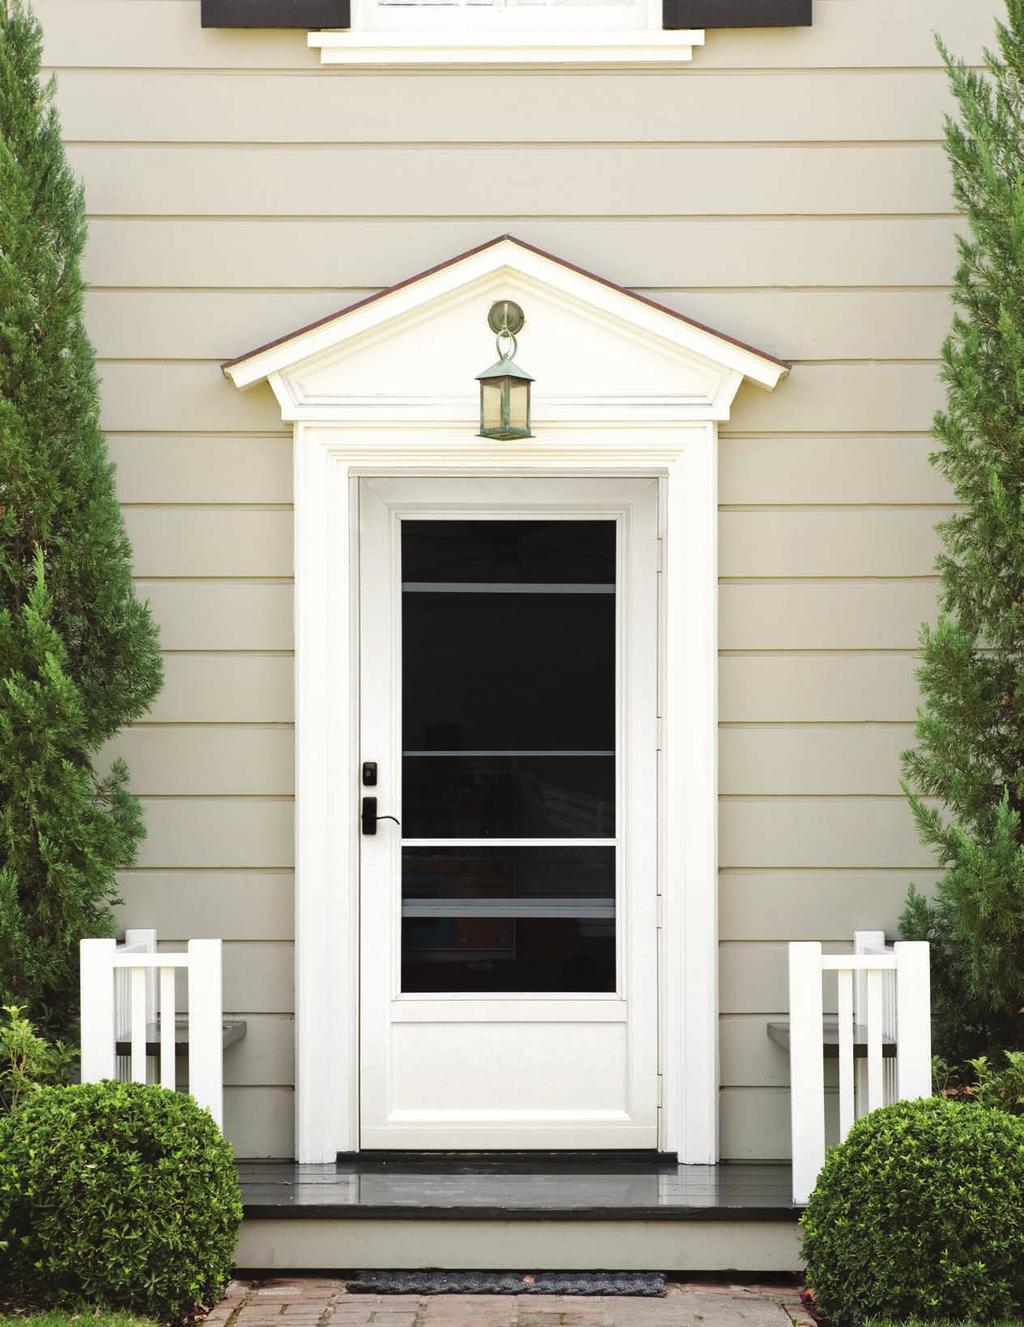 STORM DOORS Every storm door is individually customized to the highest standards in the residential market for homeowners who appreciate impeccable, uncompromising quality.